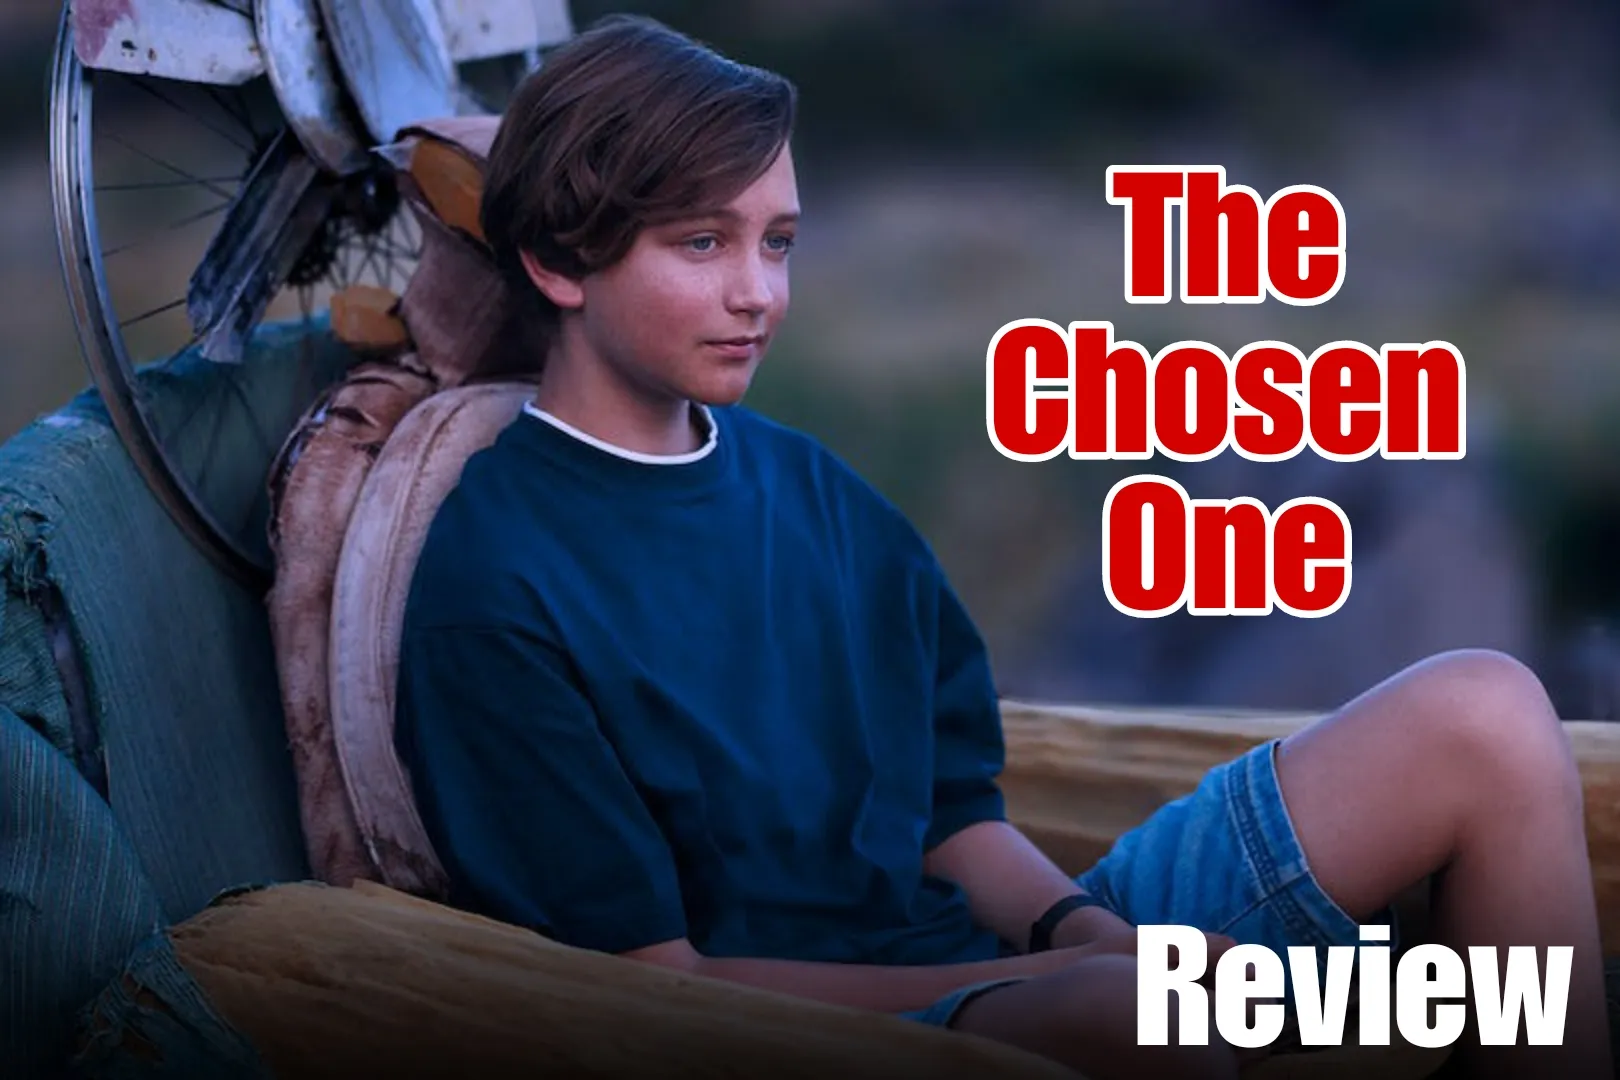 The Chosen One Review